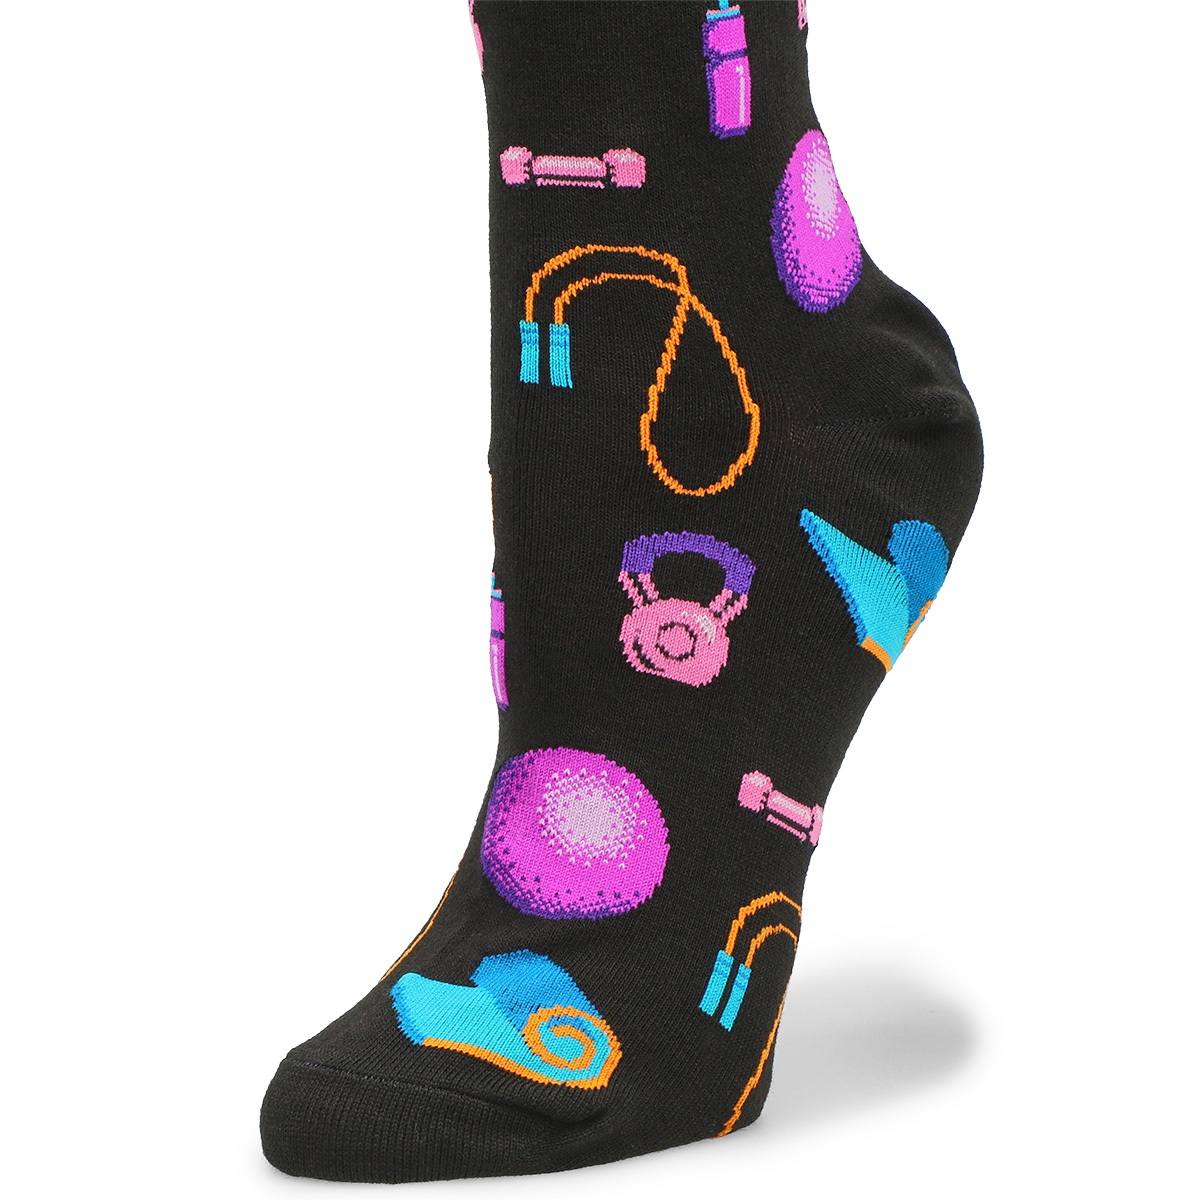 Women's Home Workout Printed Sock - Black